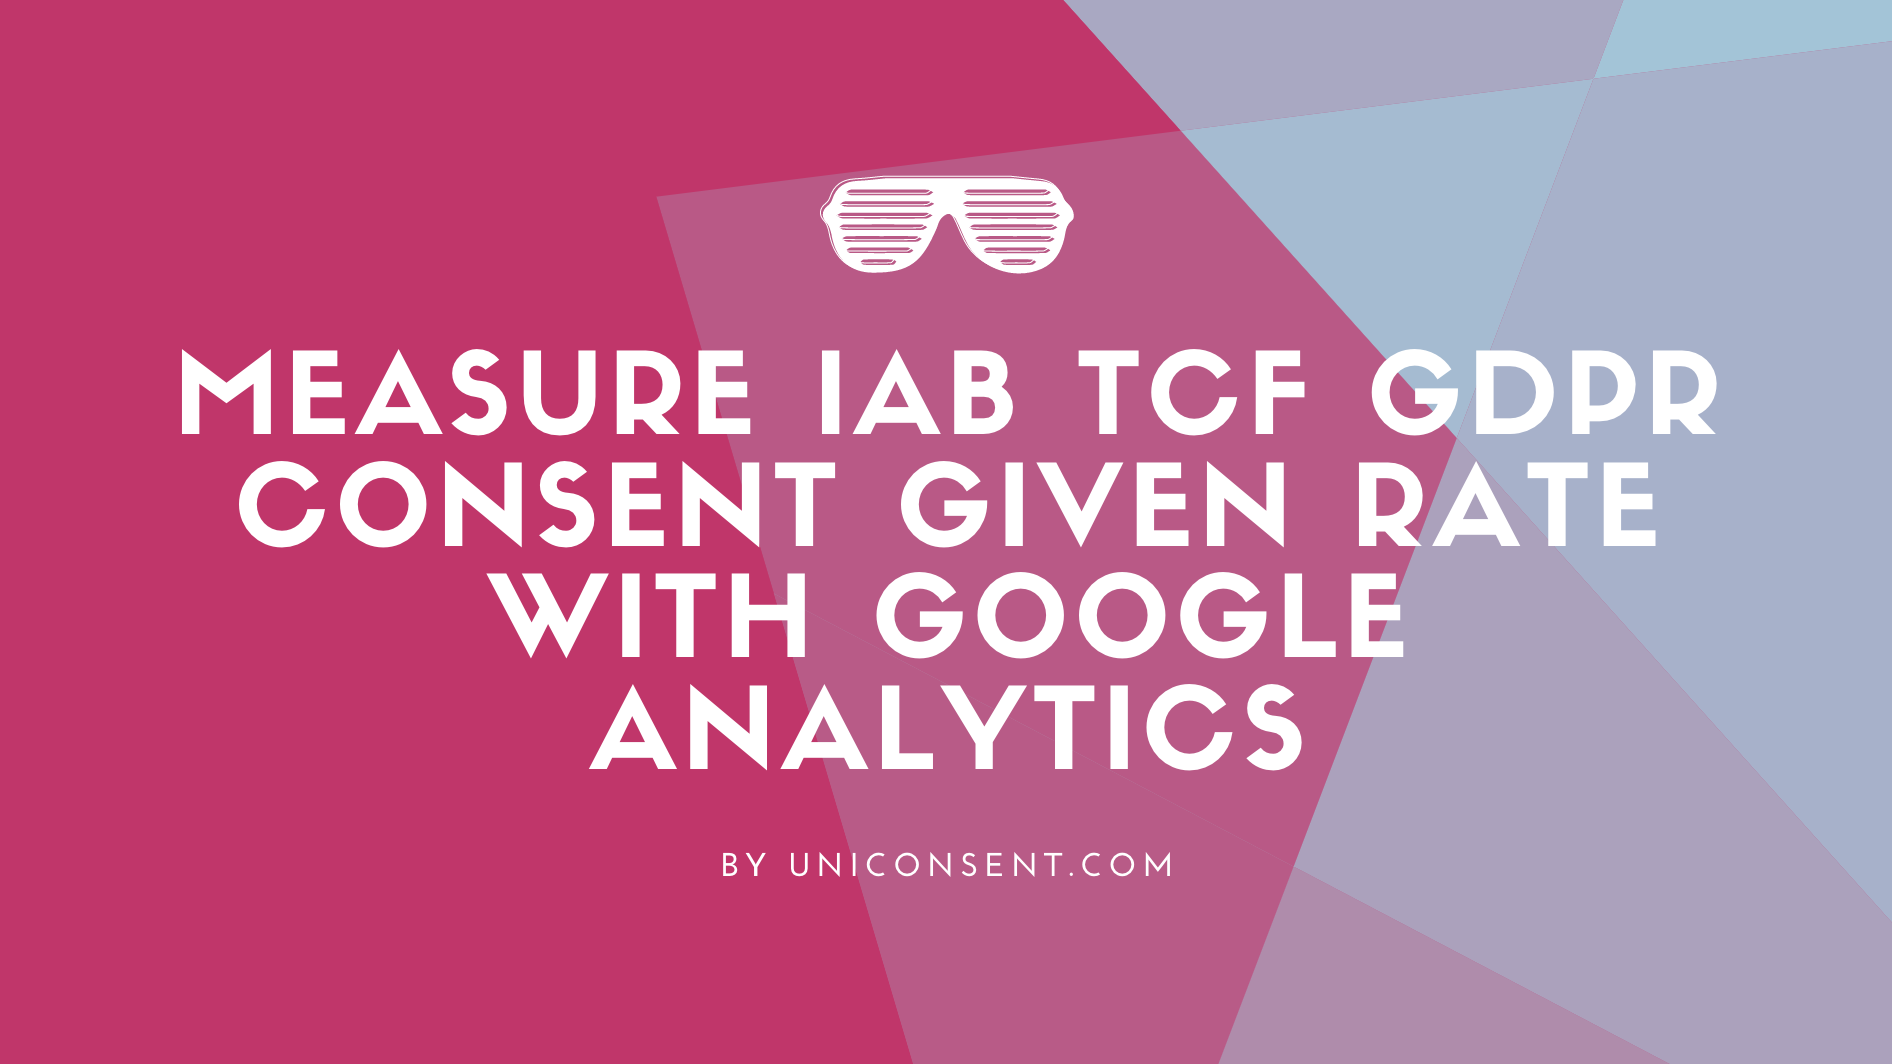 How to Measure IAB TCF GDPR Consent Rate with Google Analytics